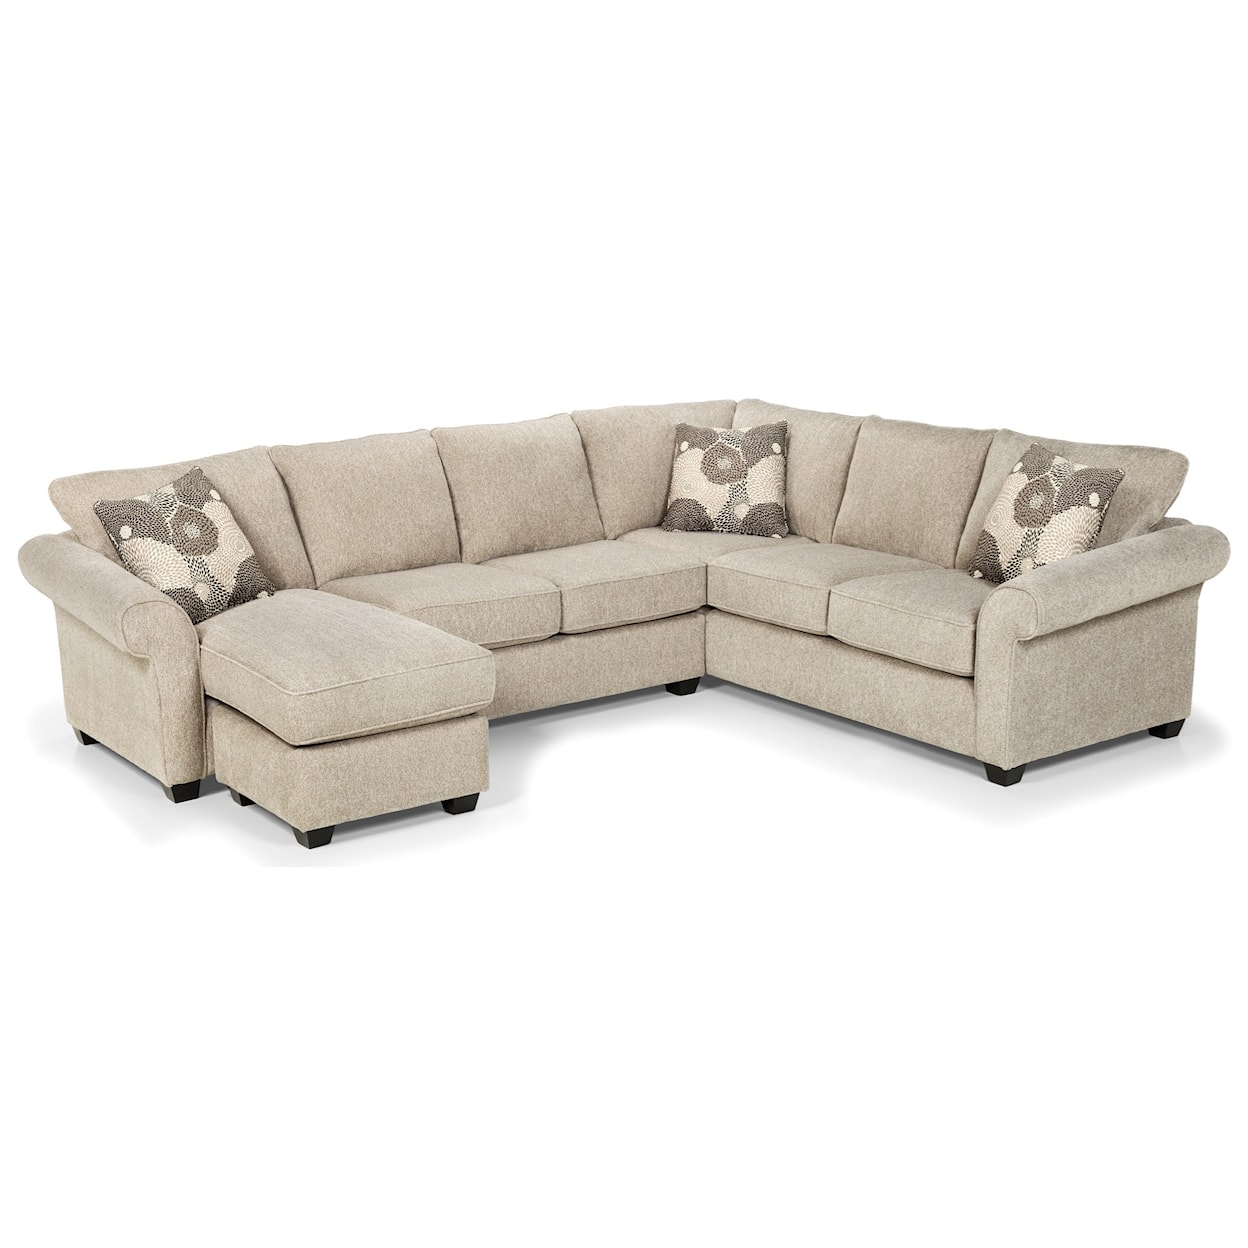 Stanton 464 5-Seat Sectional Sofa w/ LAF Chaise Lounge